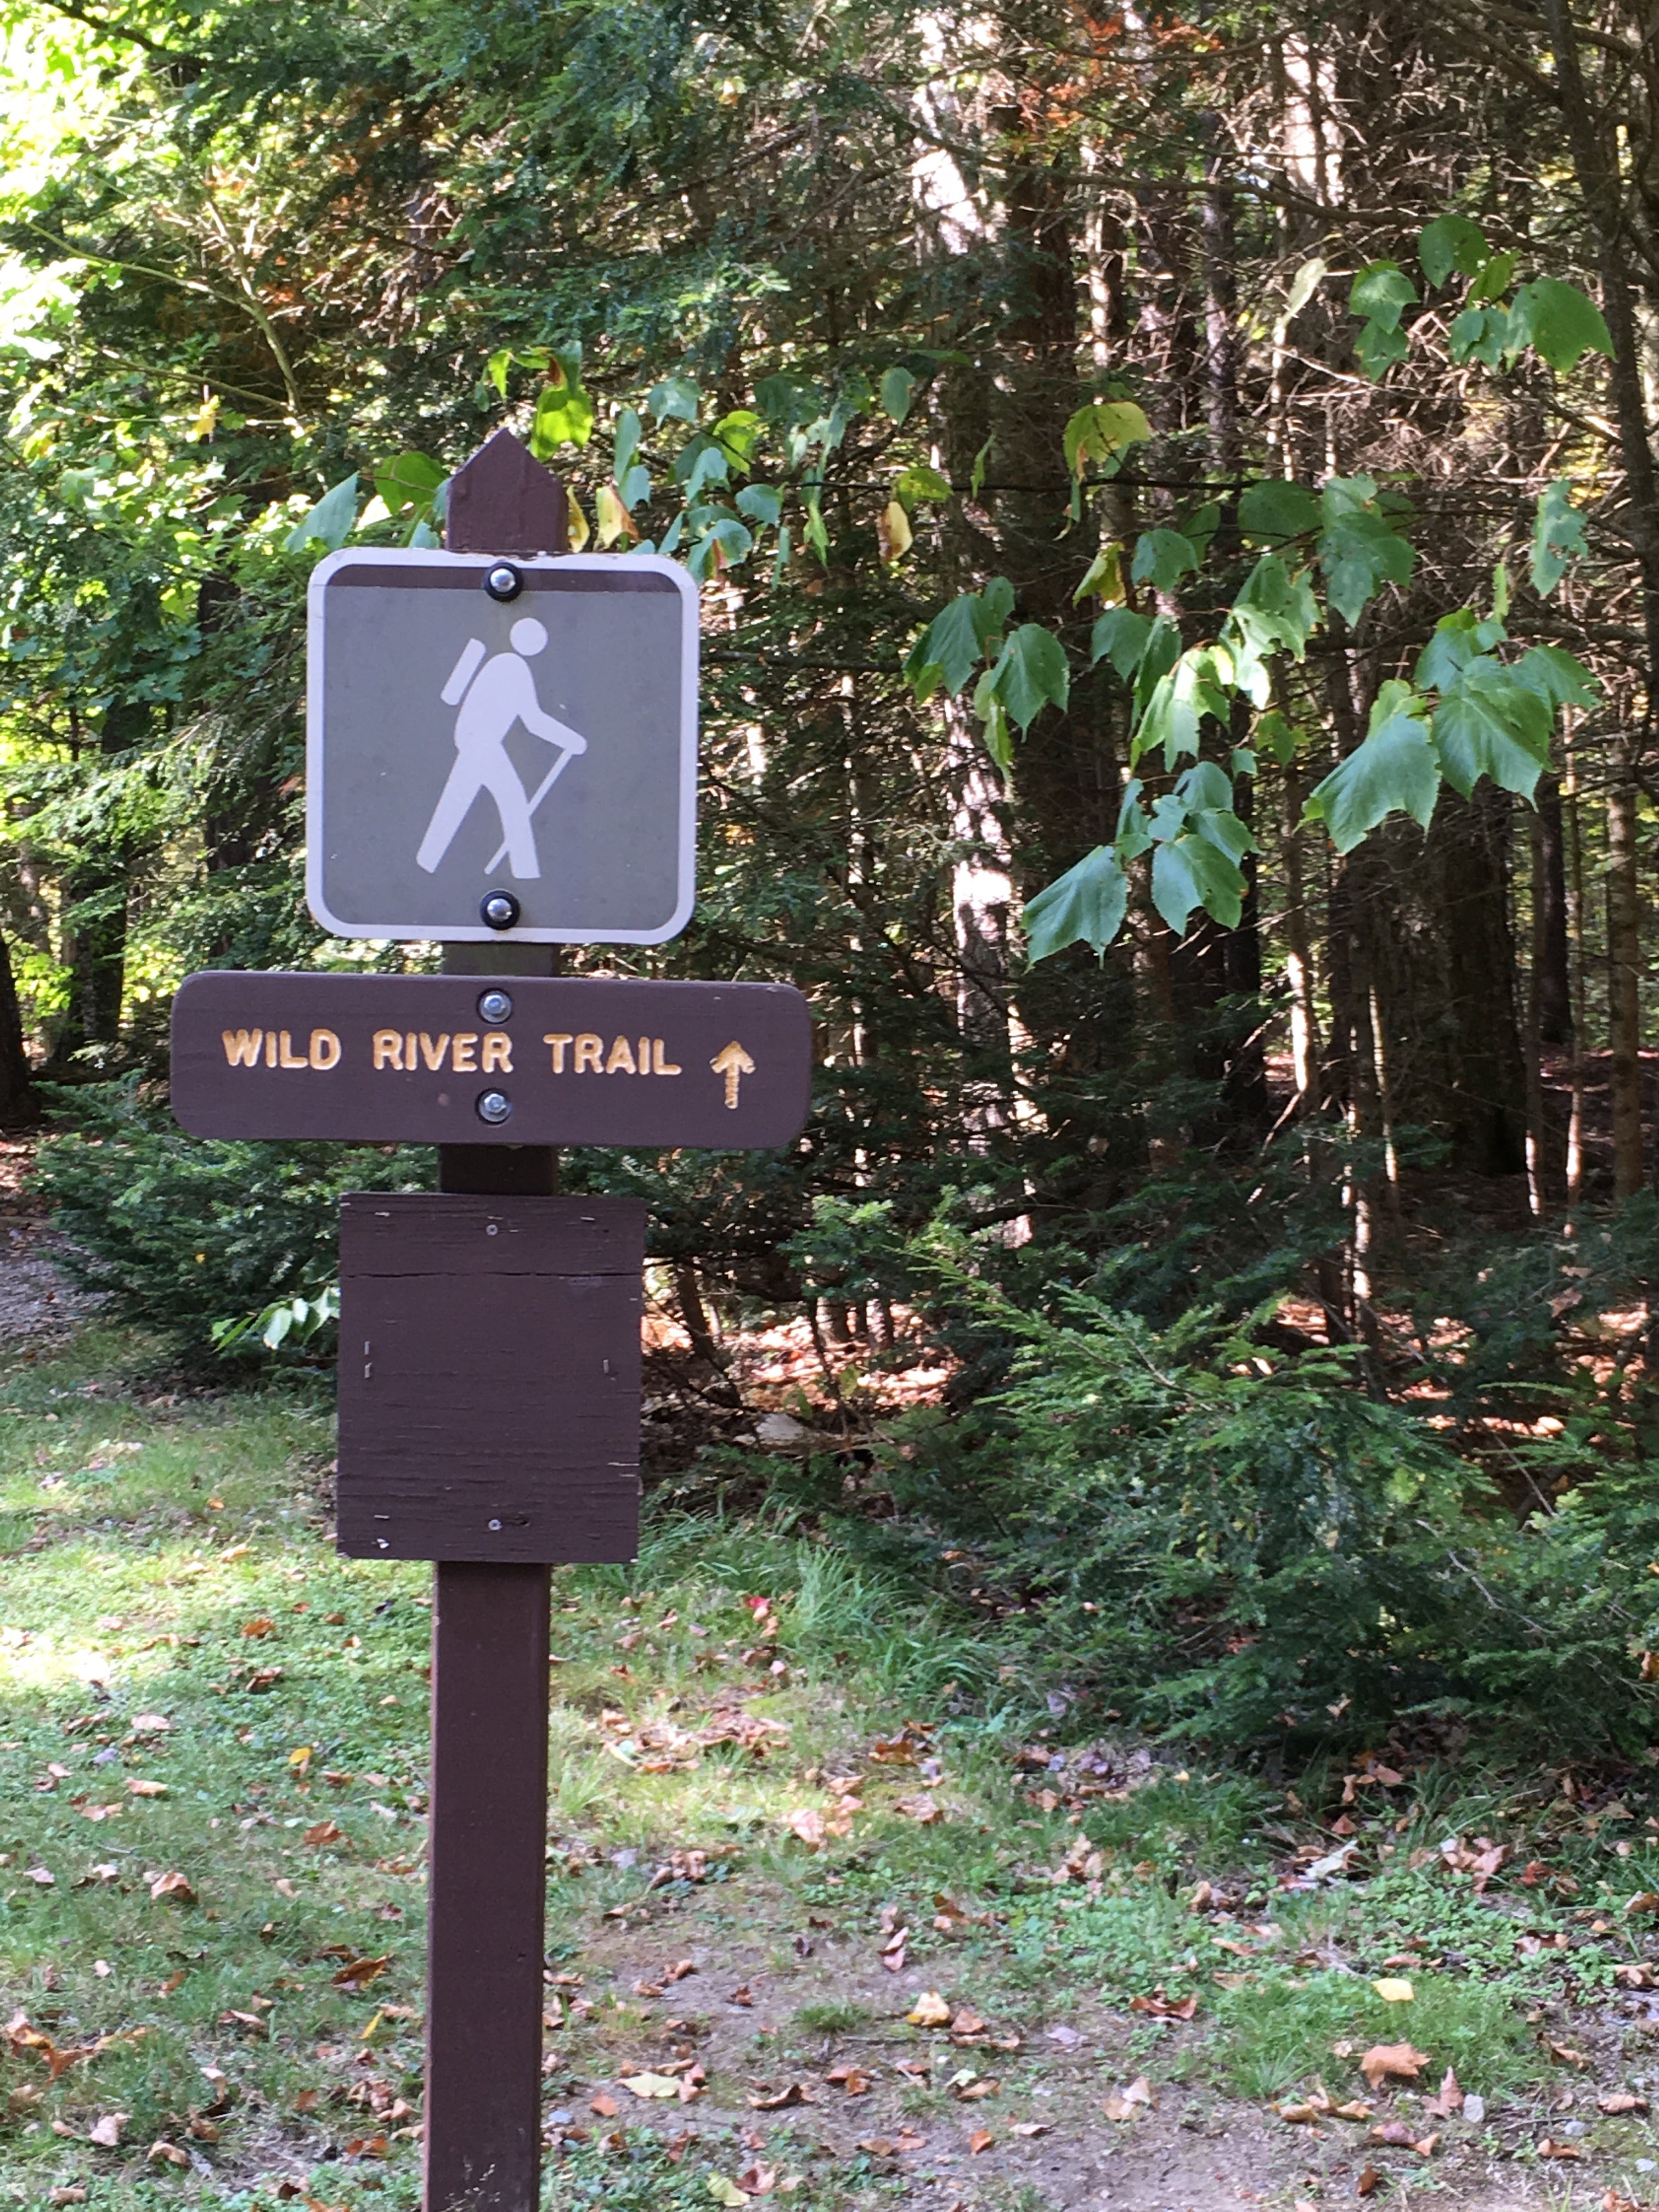 Hiking trails right from the campground